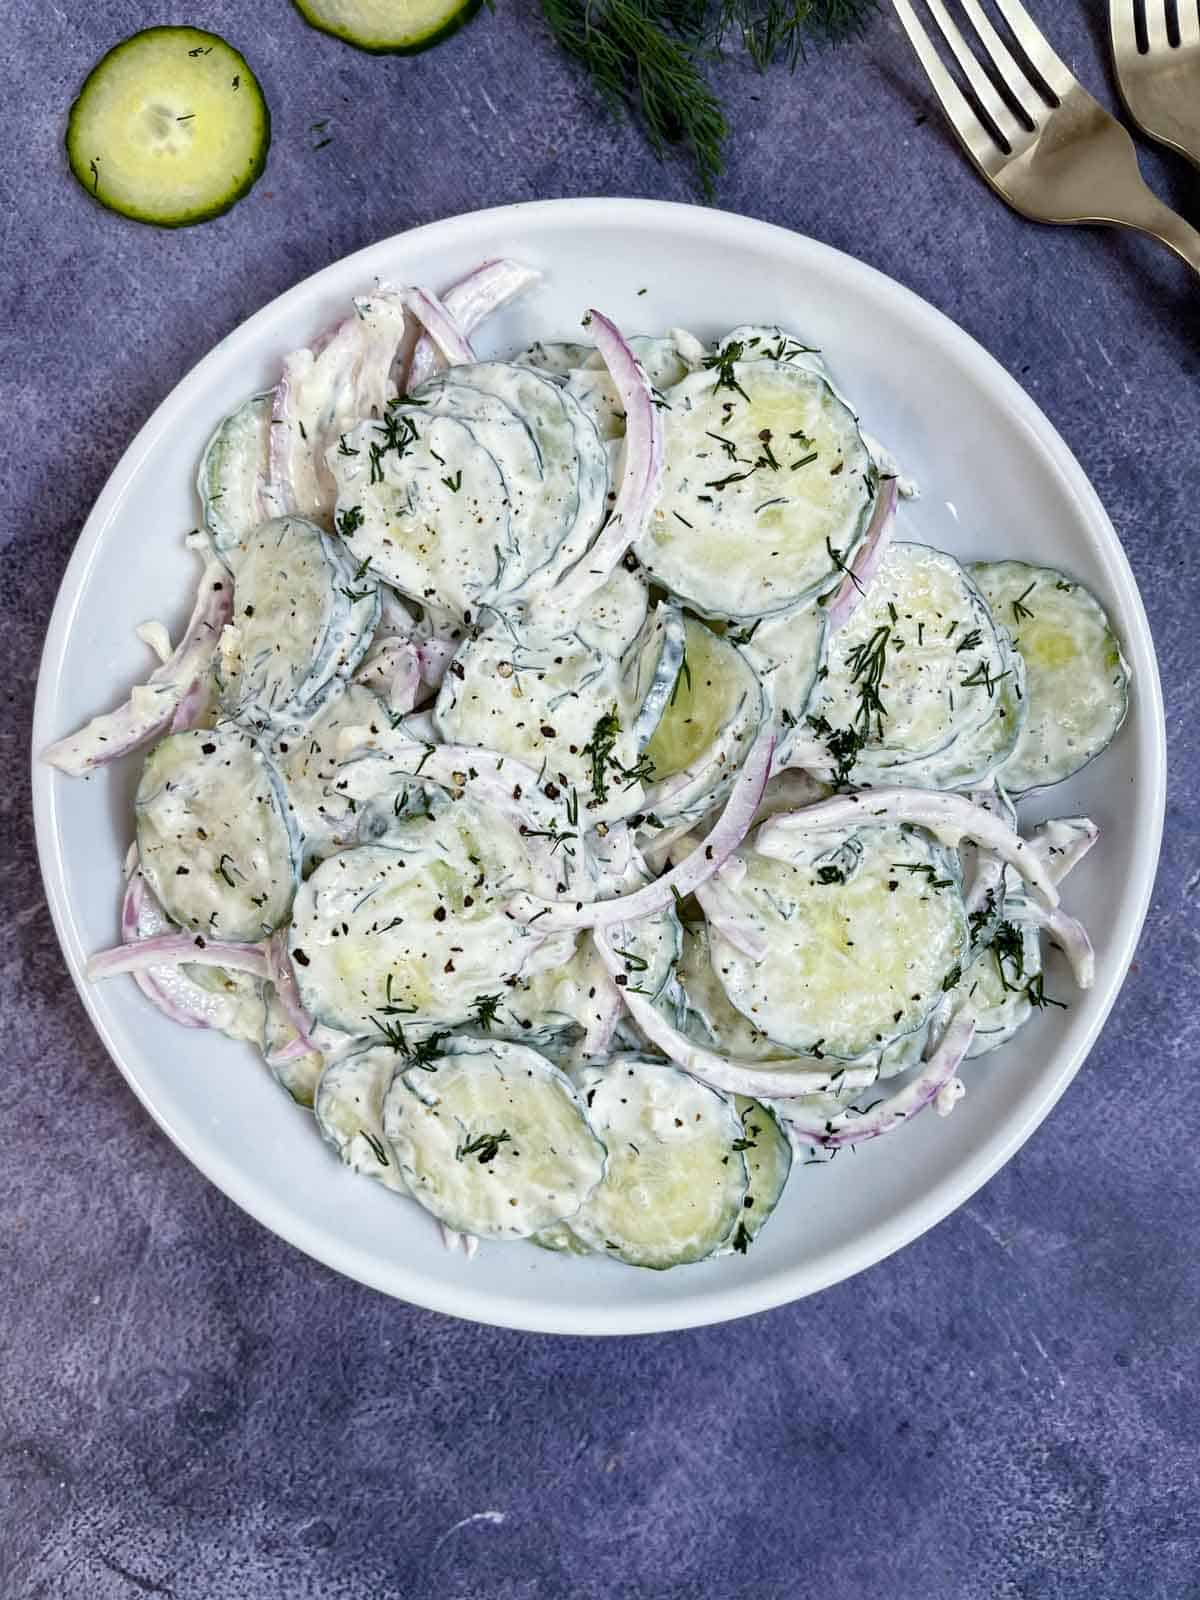 creamy cucumber salad served on a plate with forks on the side